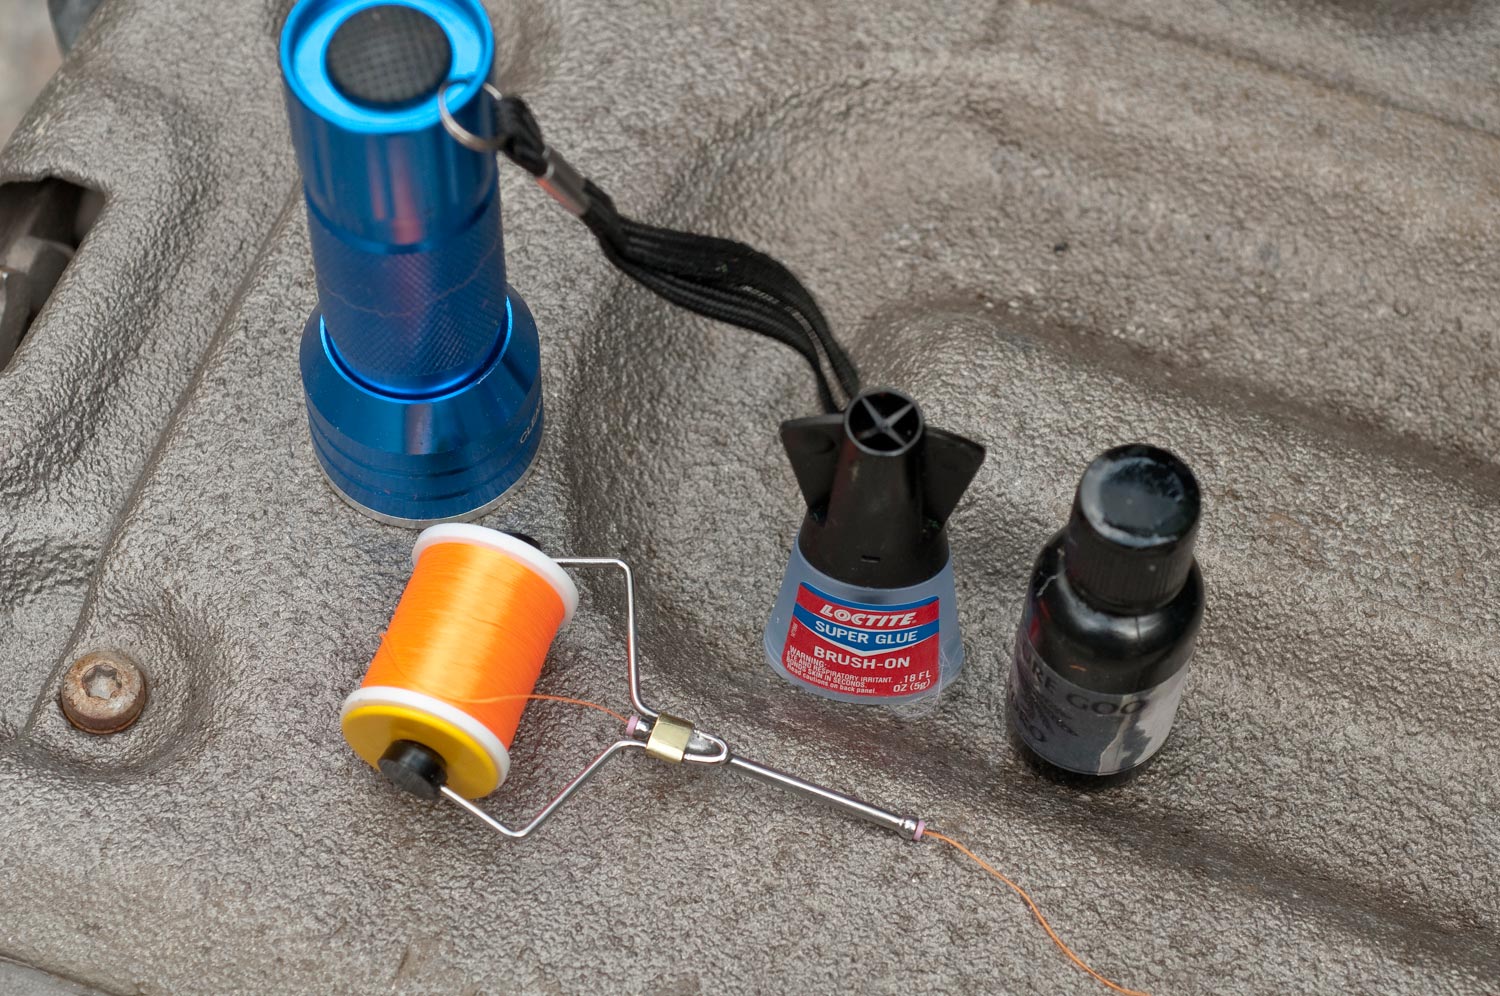 Welding Fly Lines 101: what we need to get started 